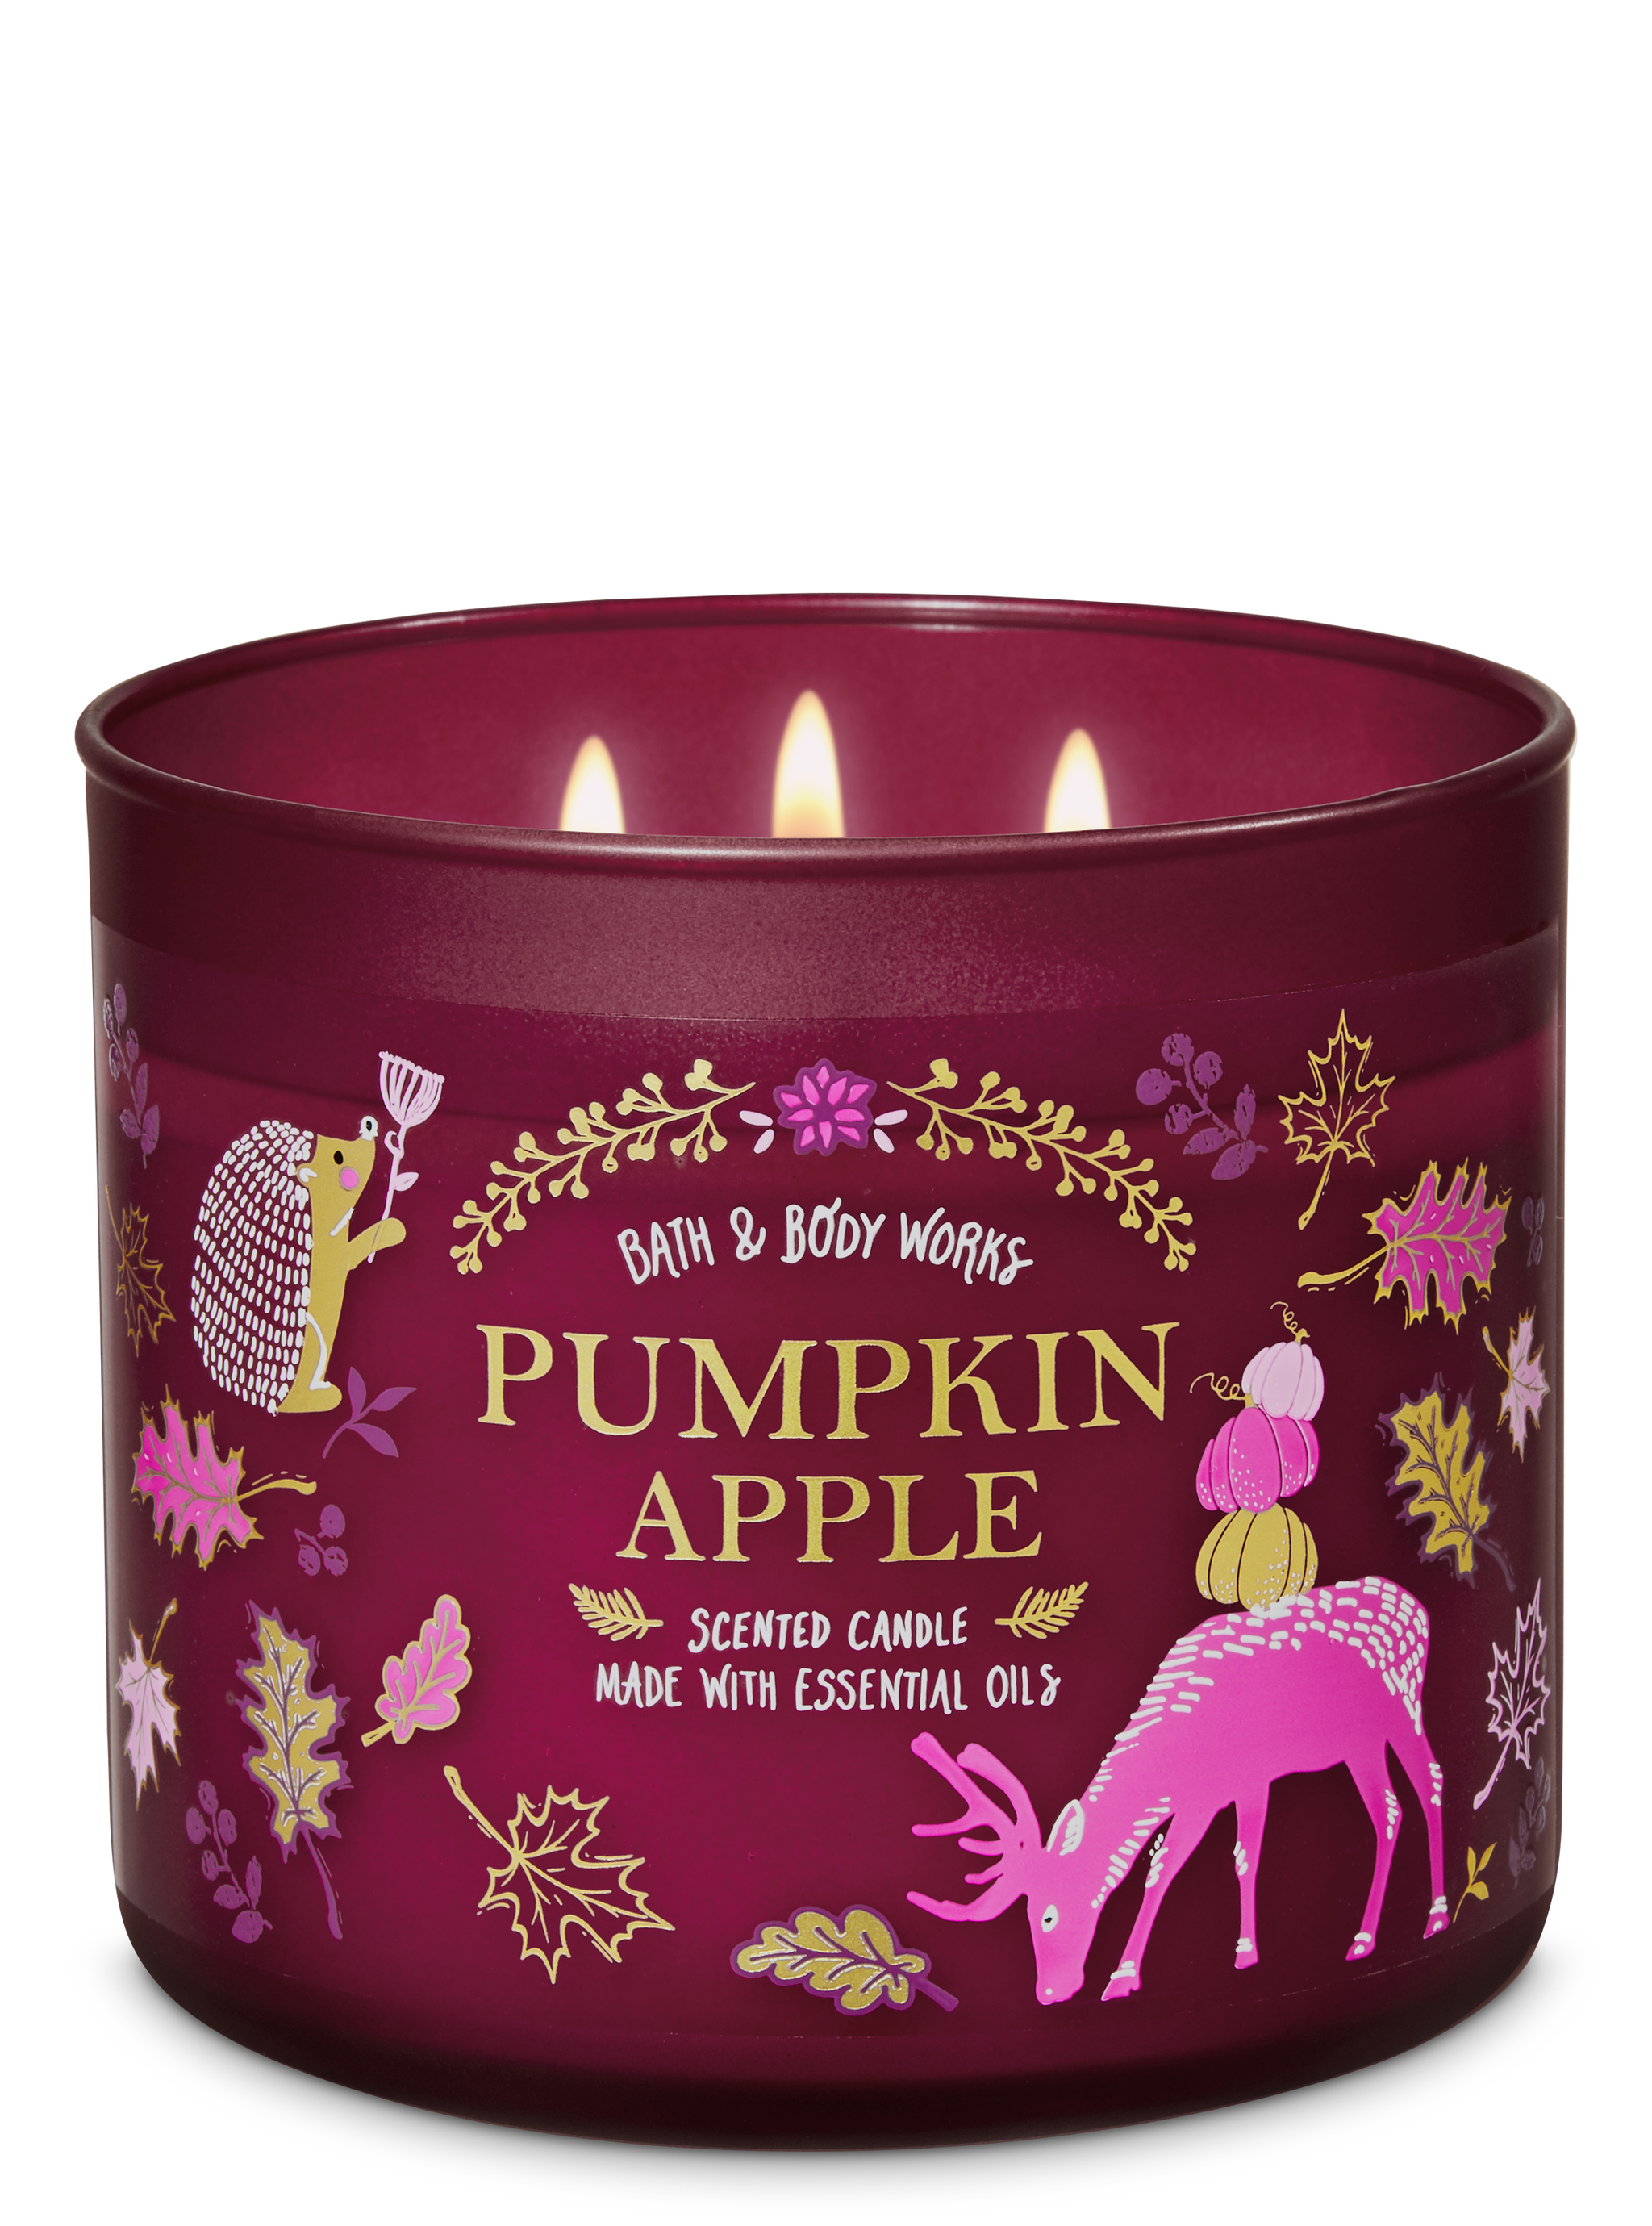 irresistible apple bath and body works